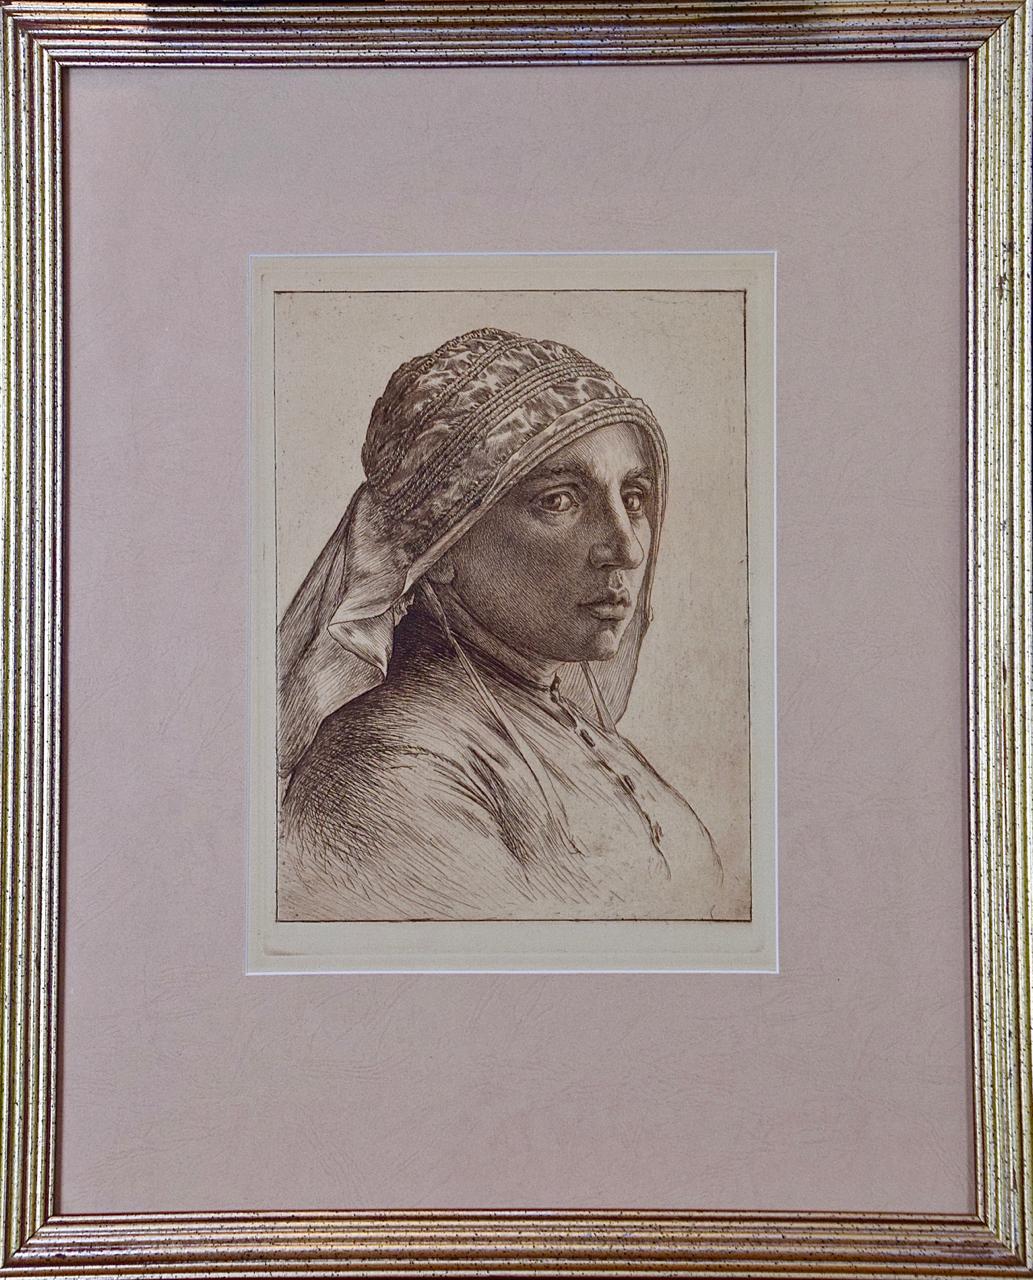 A Portrait of a Pensive Woman in a Head Scarf: An Etching by George Rhead